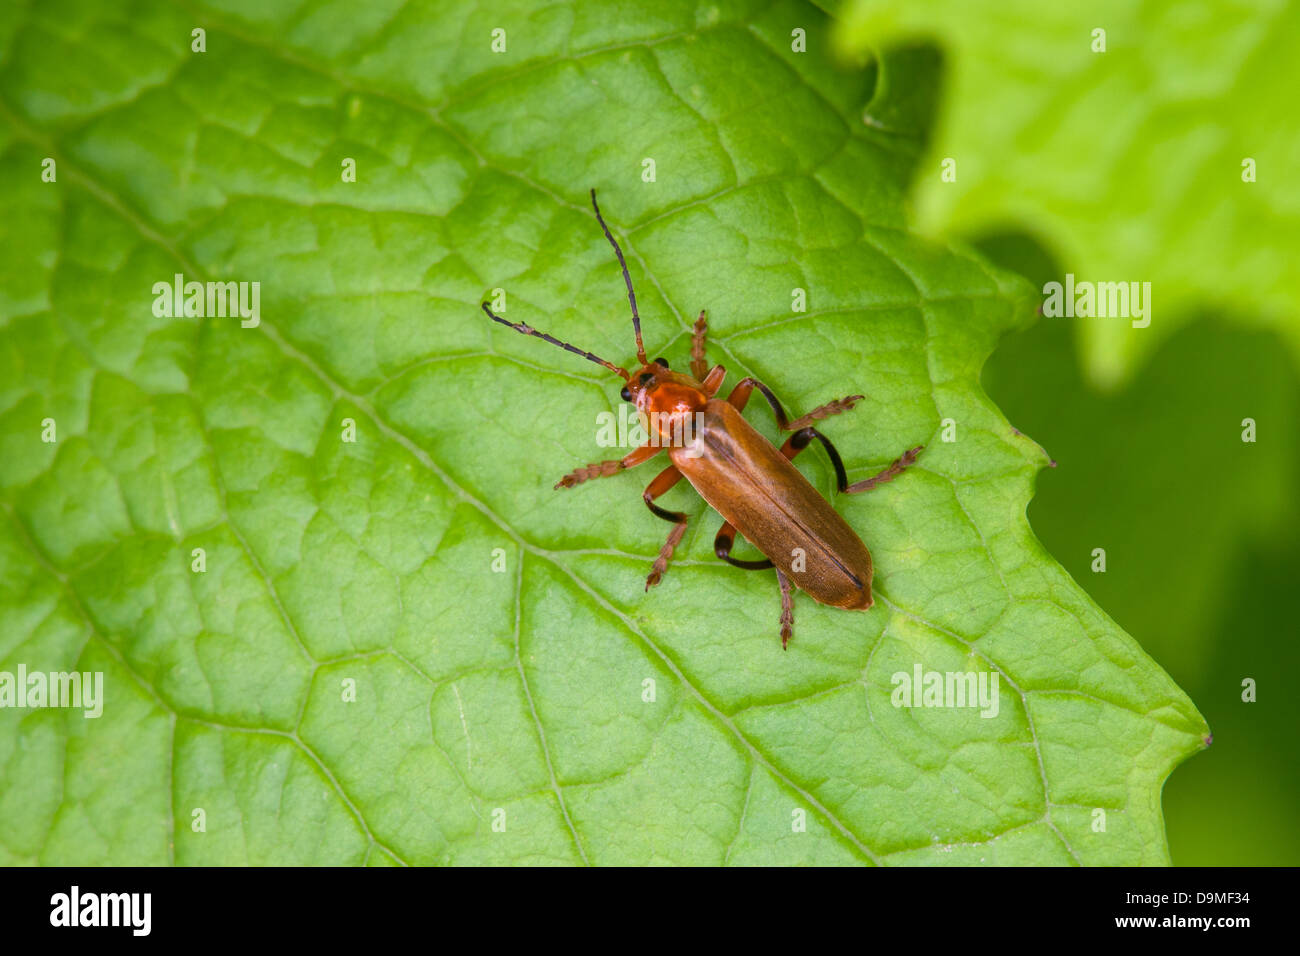 Soldier Beetle Cantharis livida adult beetle at rest on a leaf Stock Photo